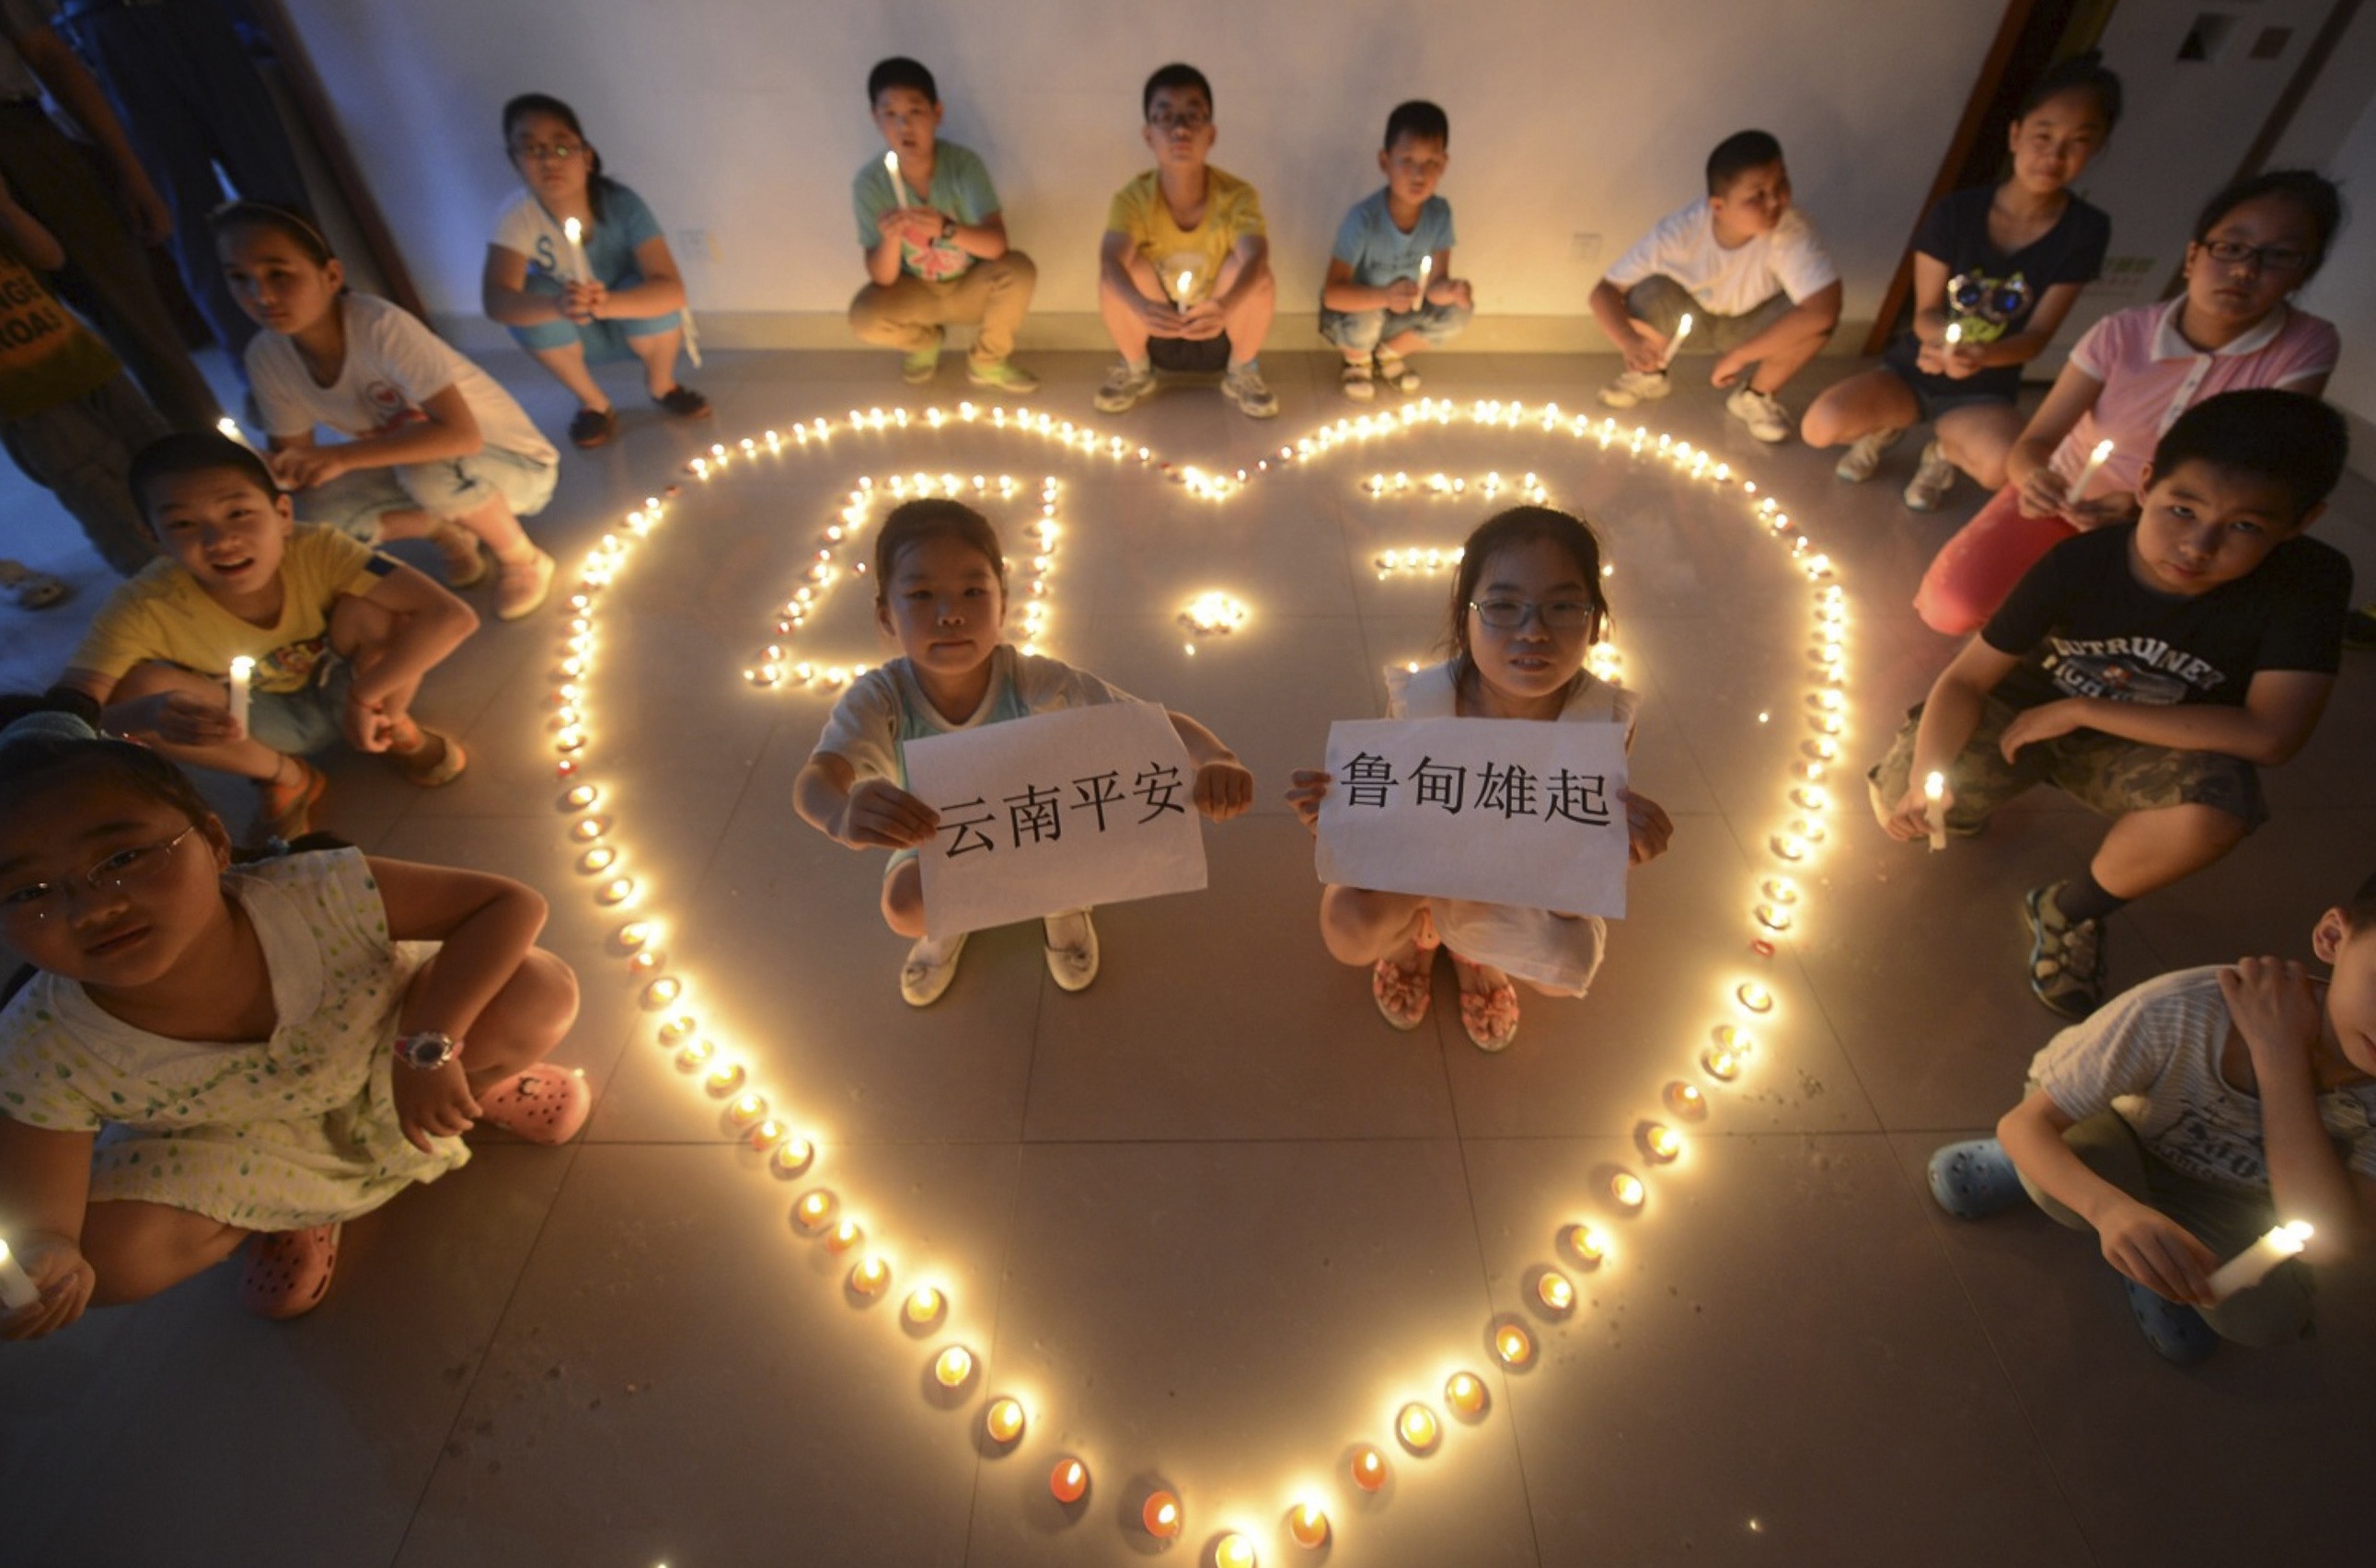 Children hold candles and signs, as they pose for a picture during a event organised to pray for those affected by a magnitude 6.3 earthquake that hit Longtoushan town, Ludian county, in Yangzhou. (Photo: Reuters)